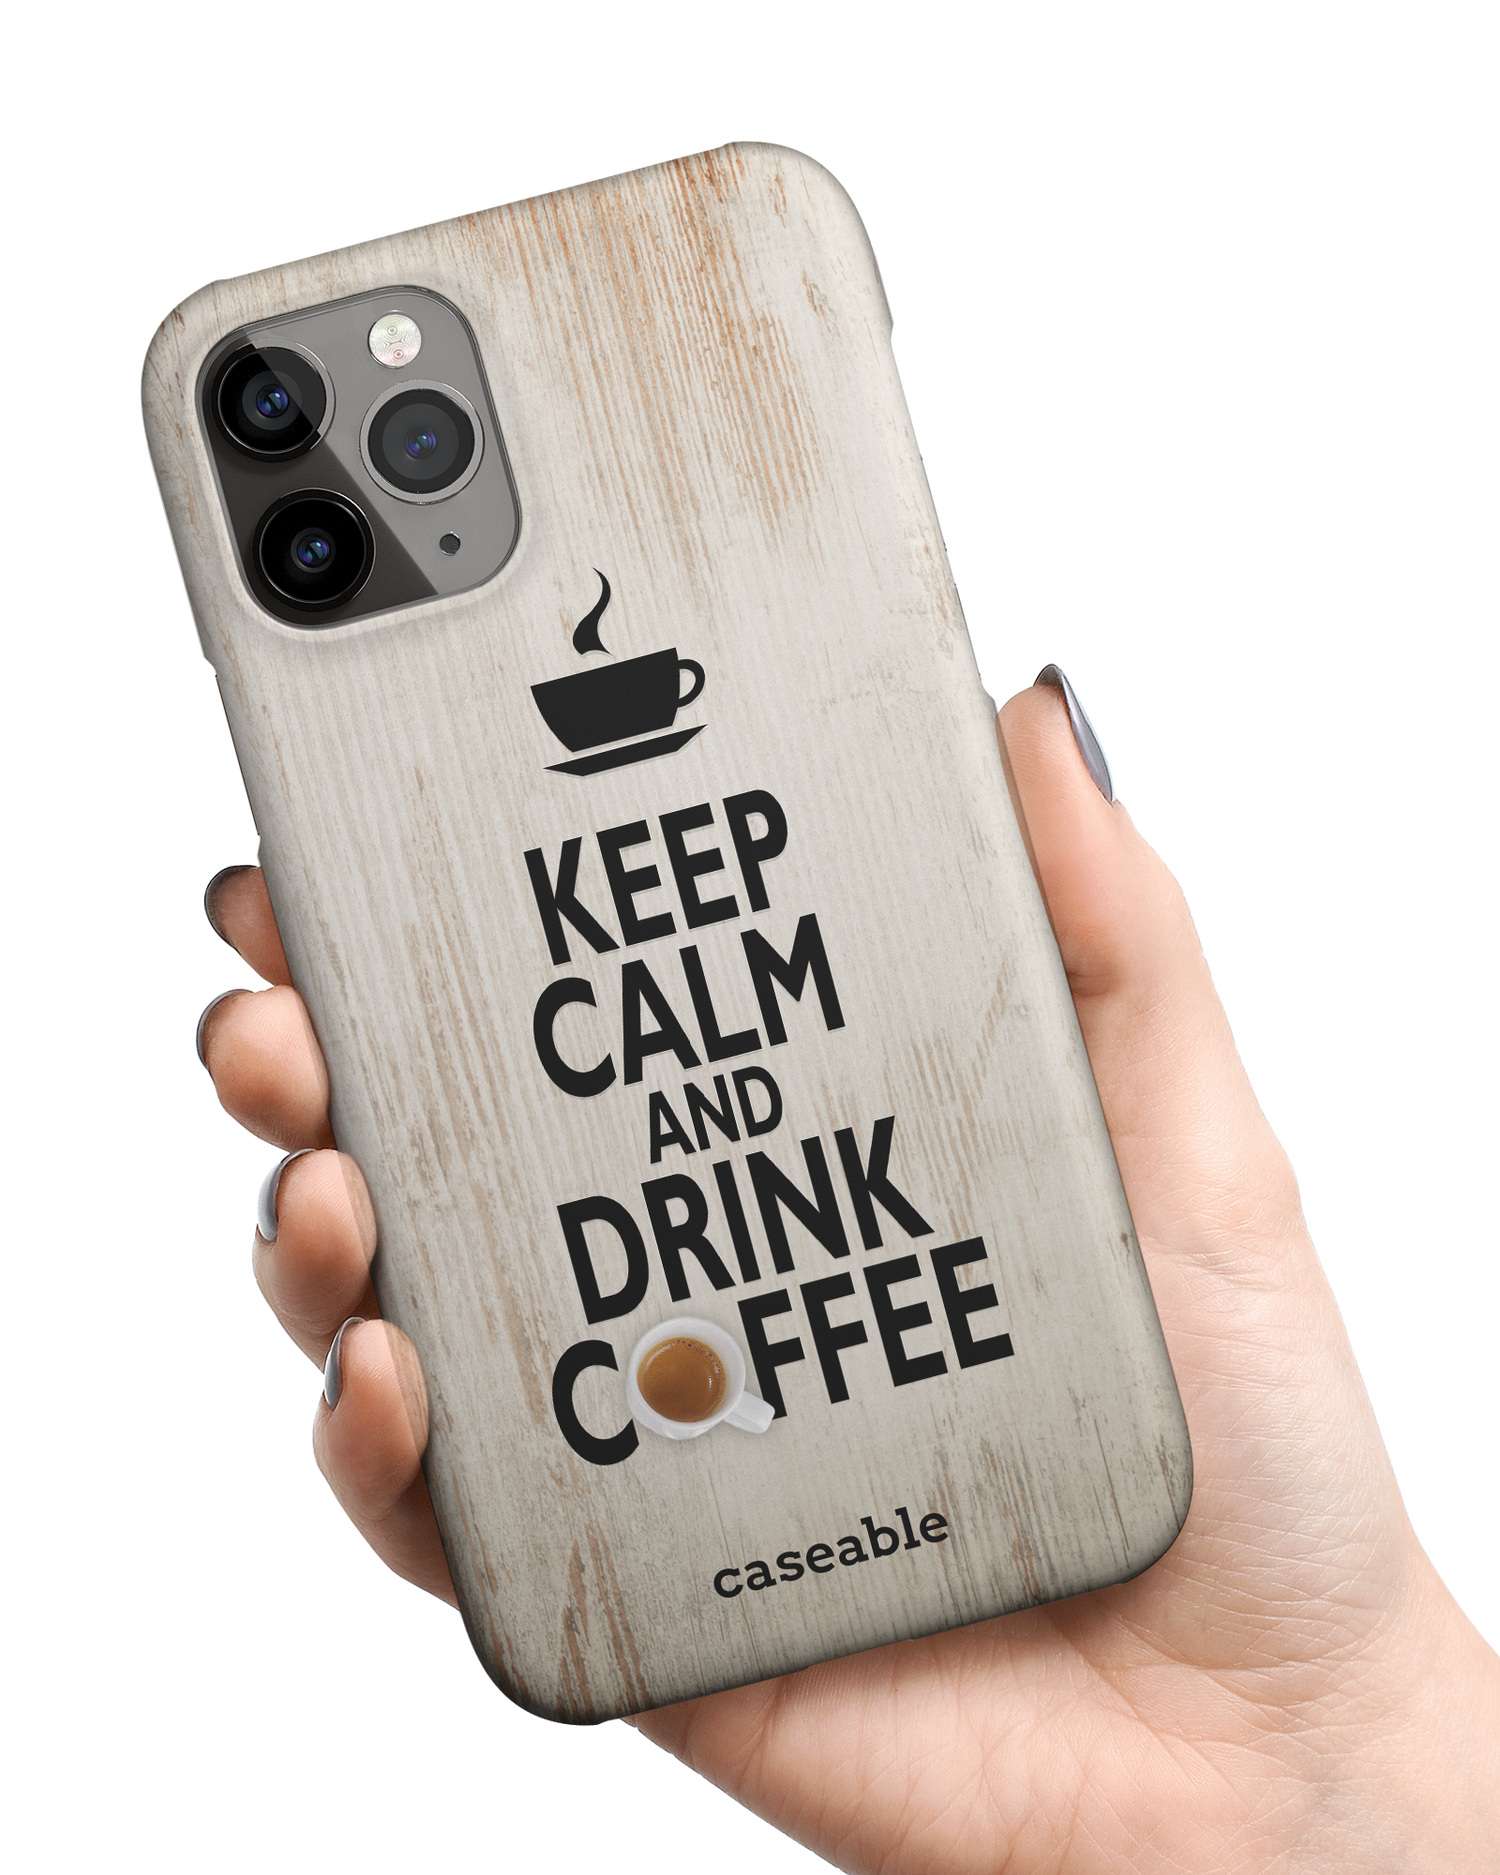 Drink Coffee Hard Shell Phone Case Apple iPhone 11 Pro Max held in hand